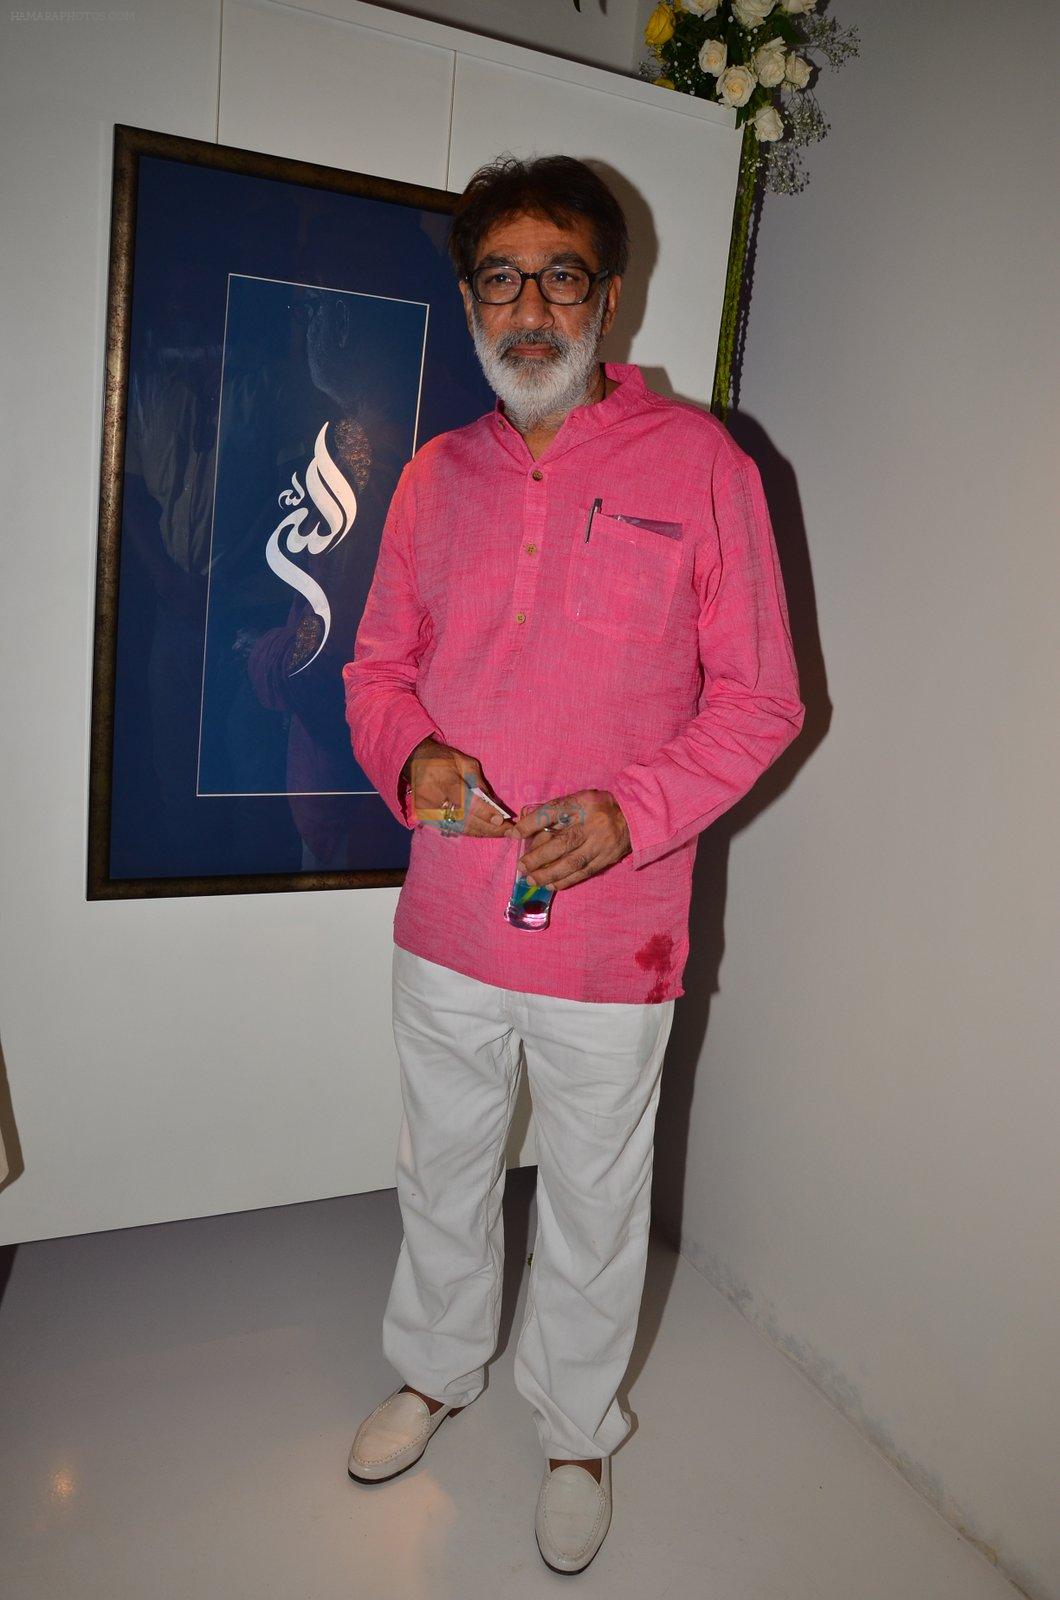 at art event on 31st March 2016